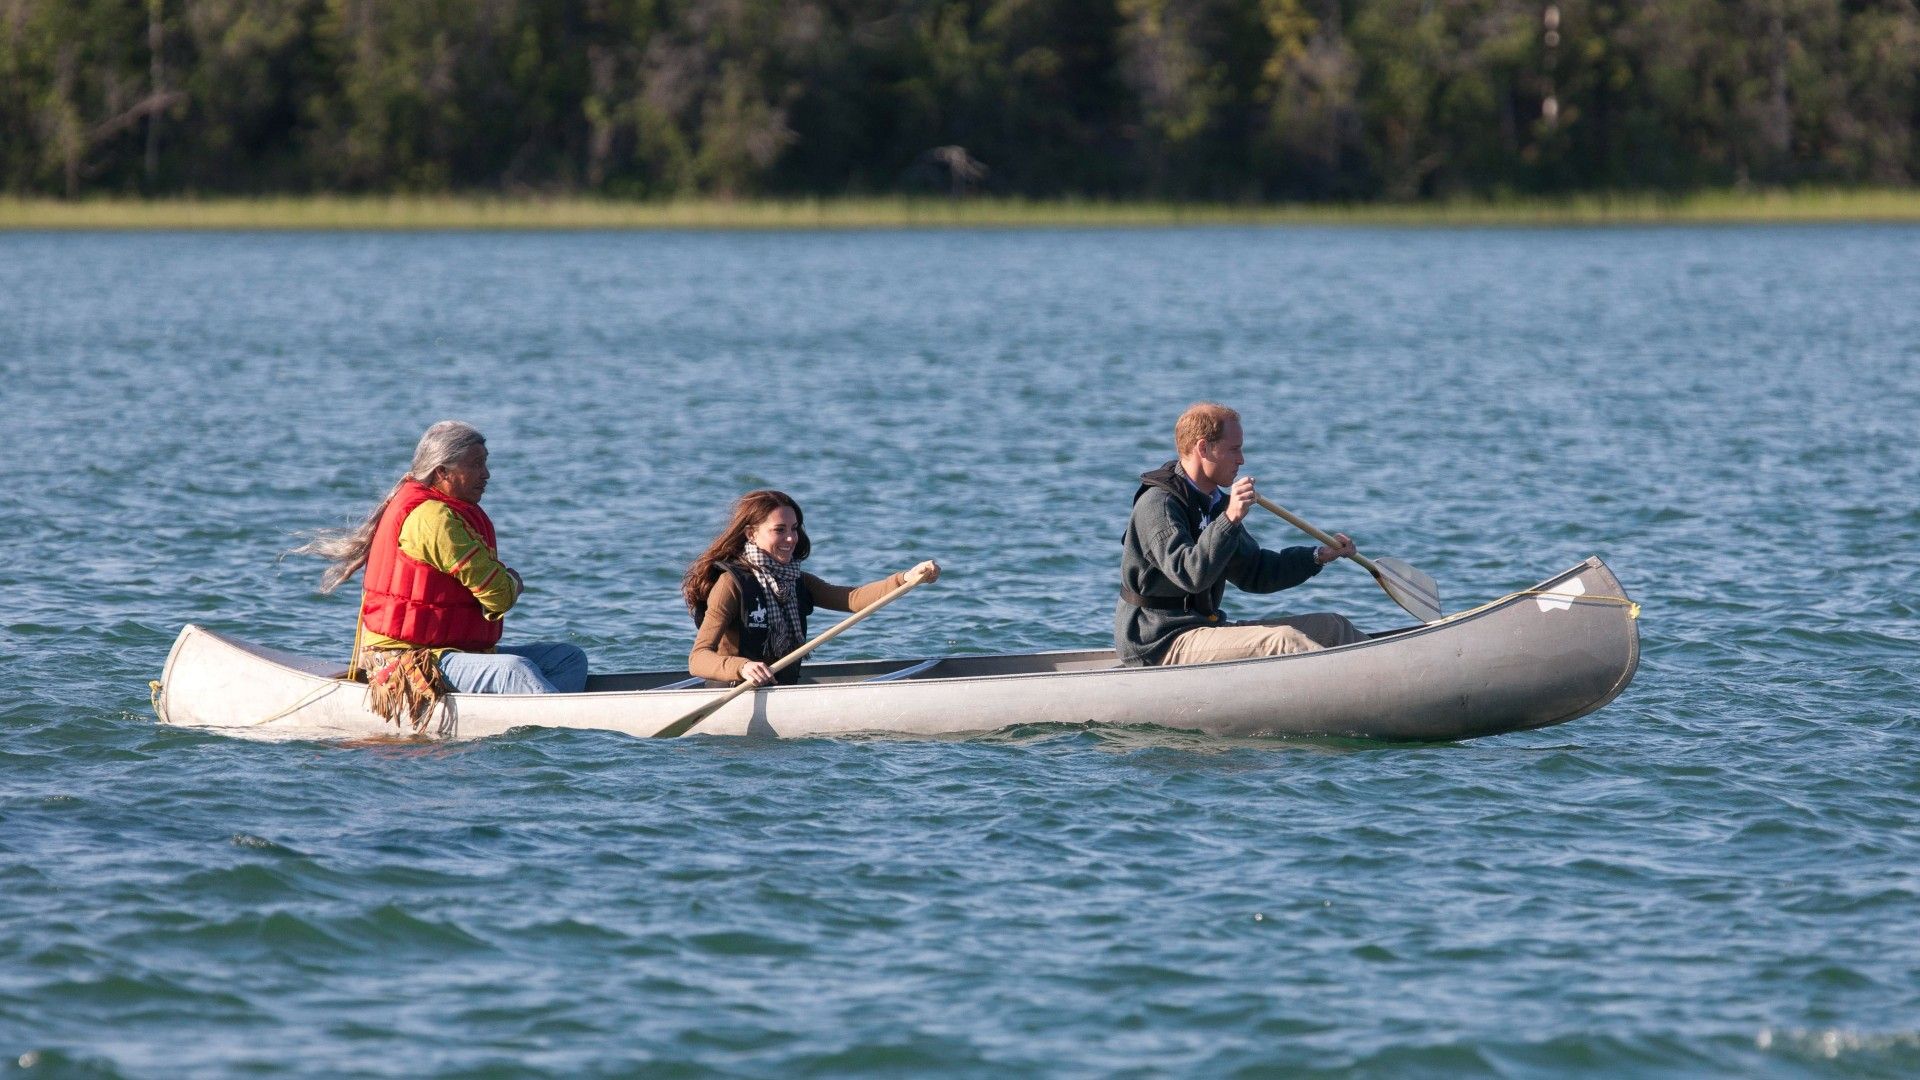 <p>                     During the dressed-up appearances and huge press attention, William and Kate still found the time to enjoy some peaceful time in the wild.                   </p>                                      <p>                     The Berkshire girl at heart is known to love the great outdoors, so it was a natural fit to see the Prince and Princess of Wales get out on the open water at Blachford Lake, in Northern Canada, near Yellowknife.                   </p>                                      <p>                     As part of her known sporting prowess, Kate trained to row across the English Channel in 2007 alongside a 21-strong female crew called The Sisterhood.                   </p>